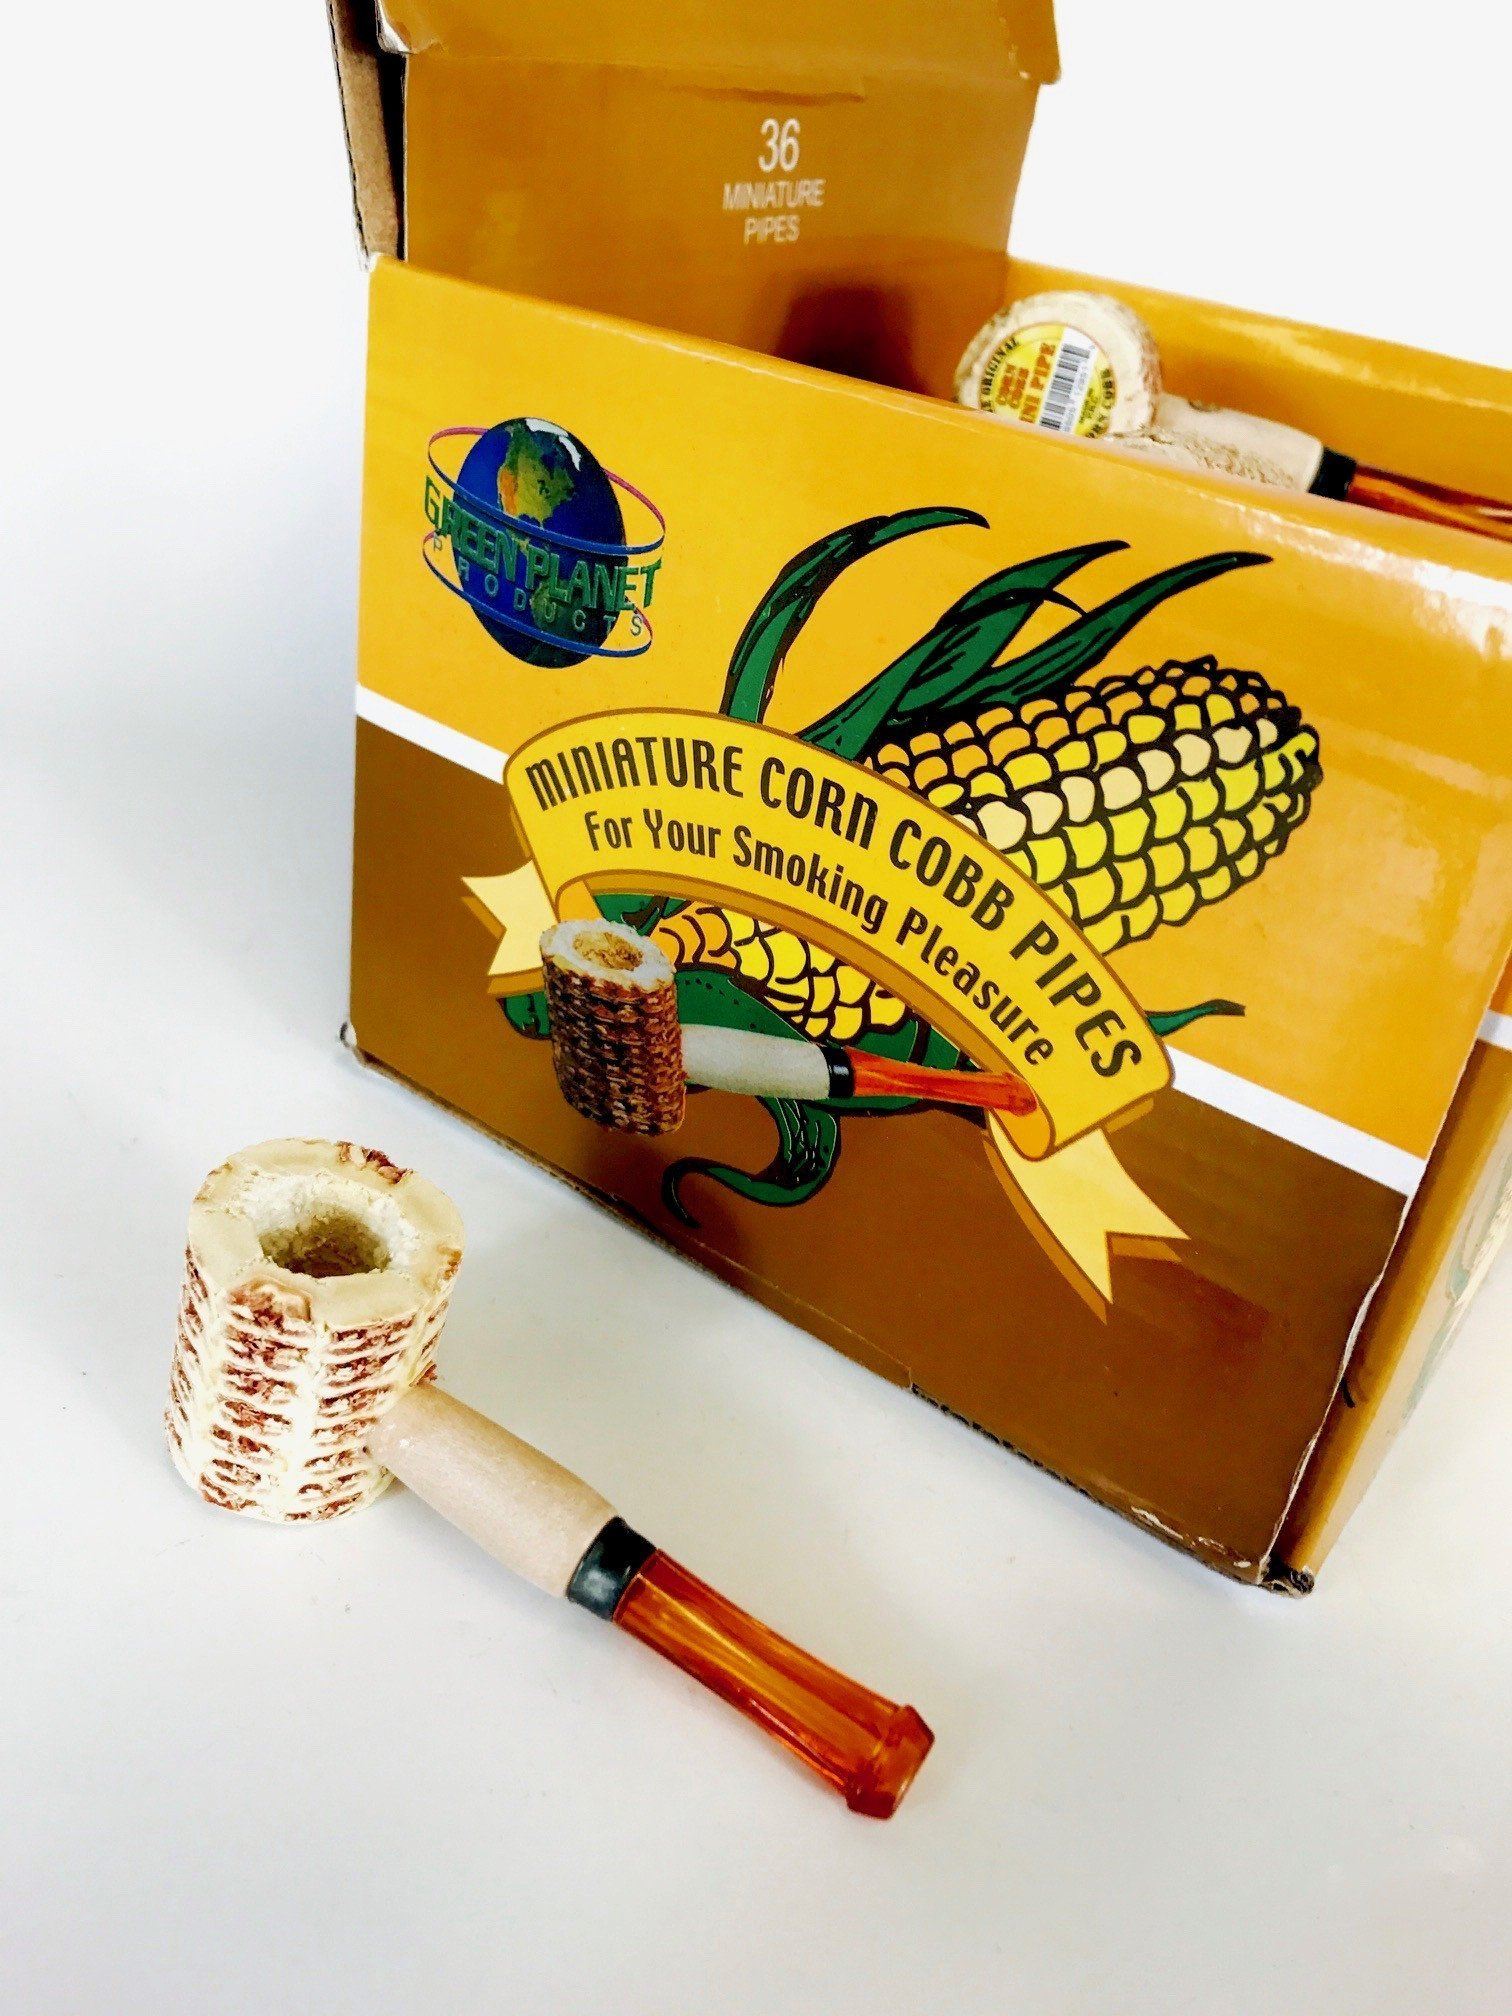 Miniature Corn Cobb Pipe Flower Power Packages 